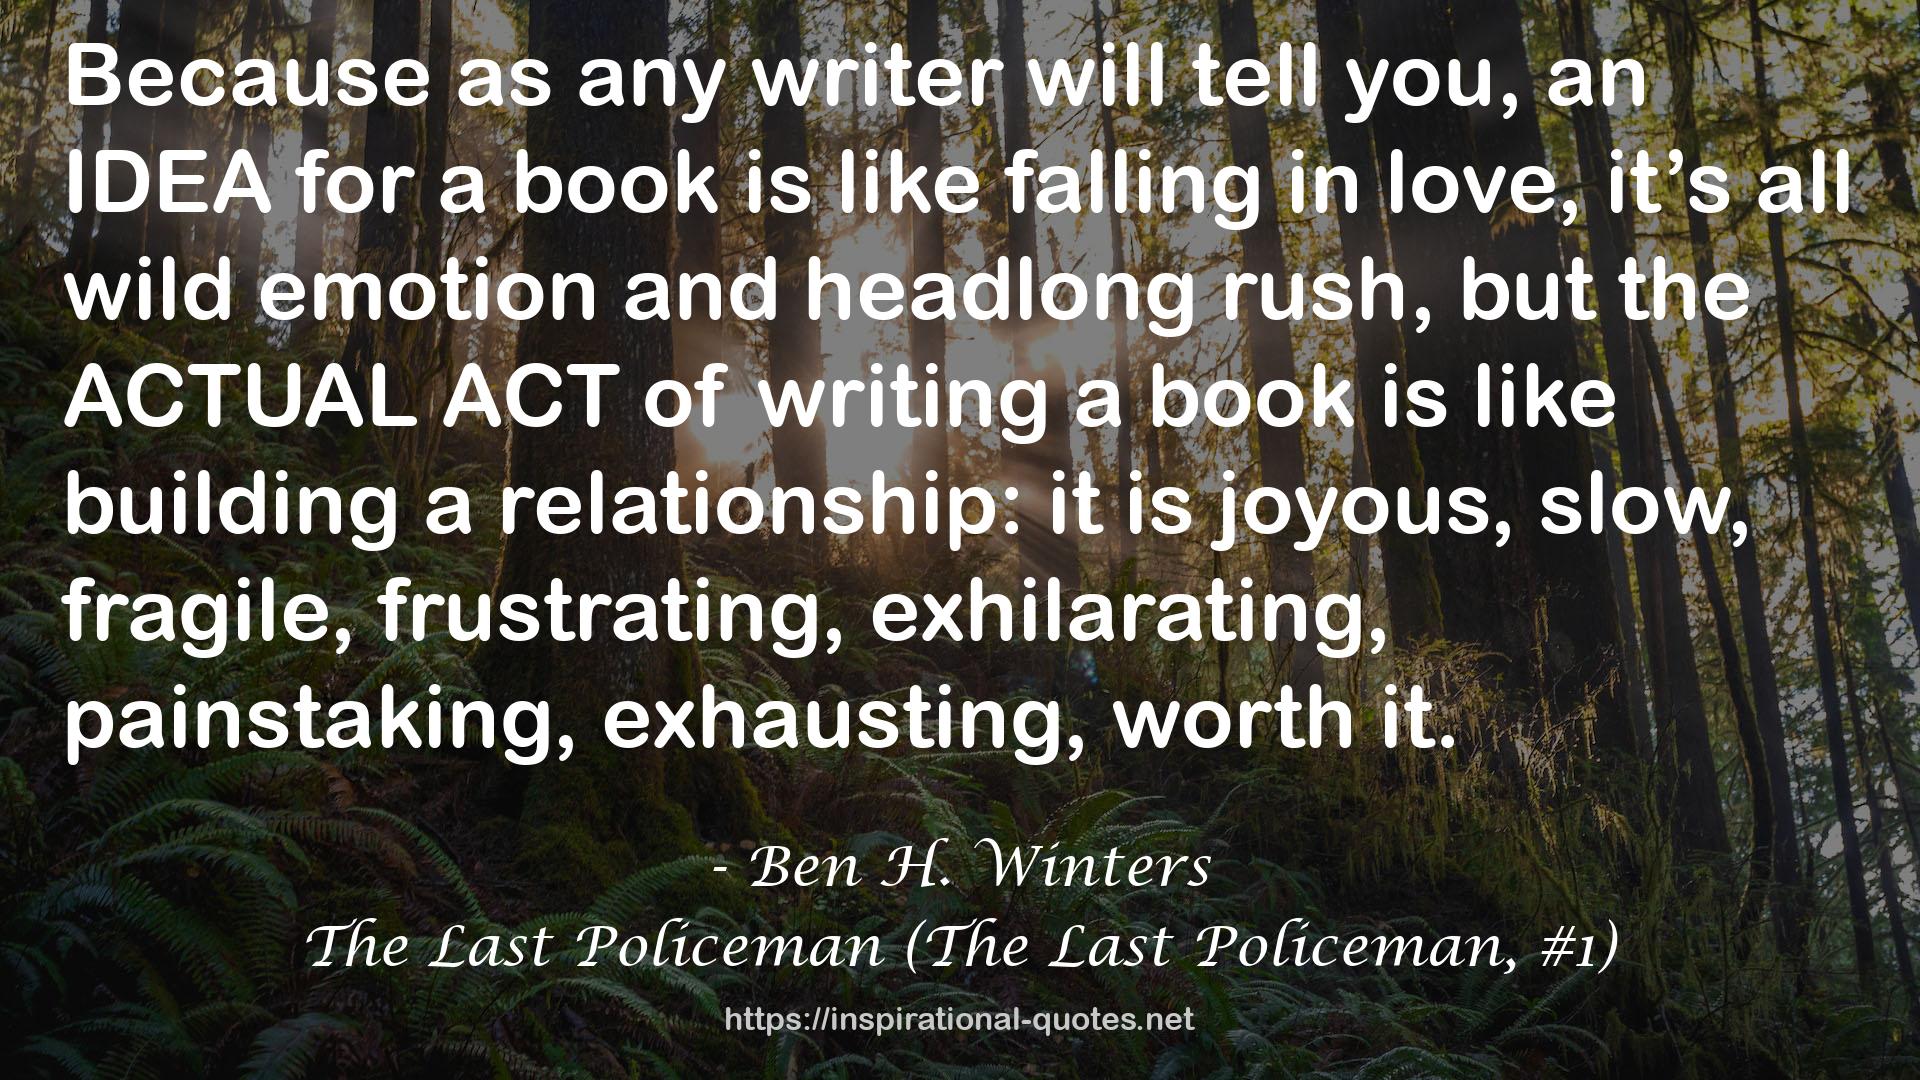 The Last Policeman (The Last Policeman, #1) QUOTES